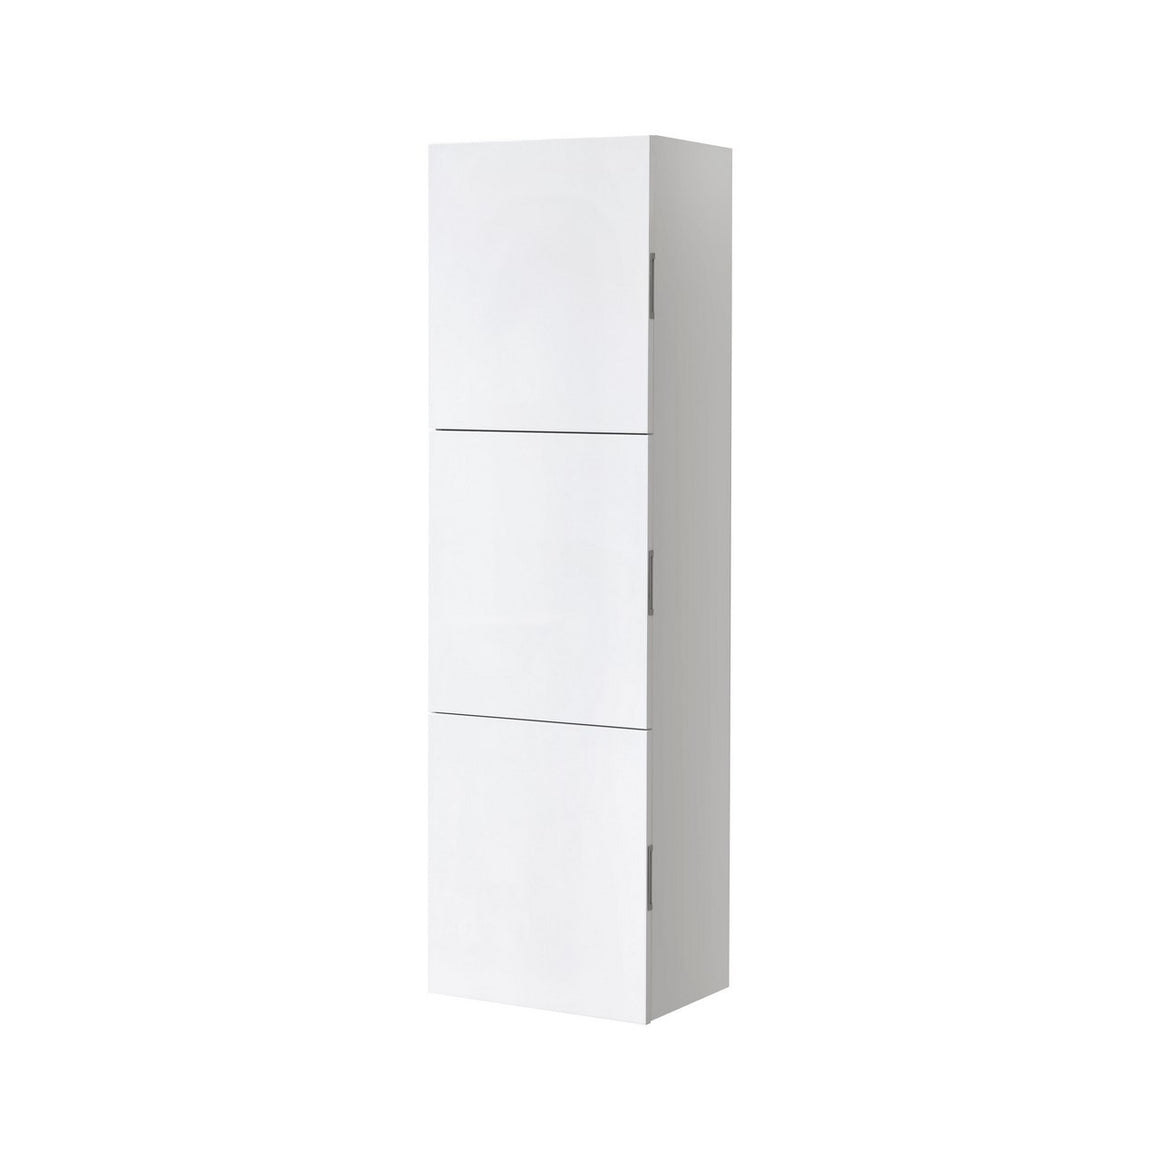 Bliss 18" Wide by 59" High Linen Side Cabinet With Three Doors in Gloss White Finish